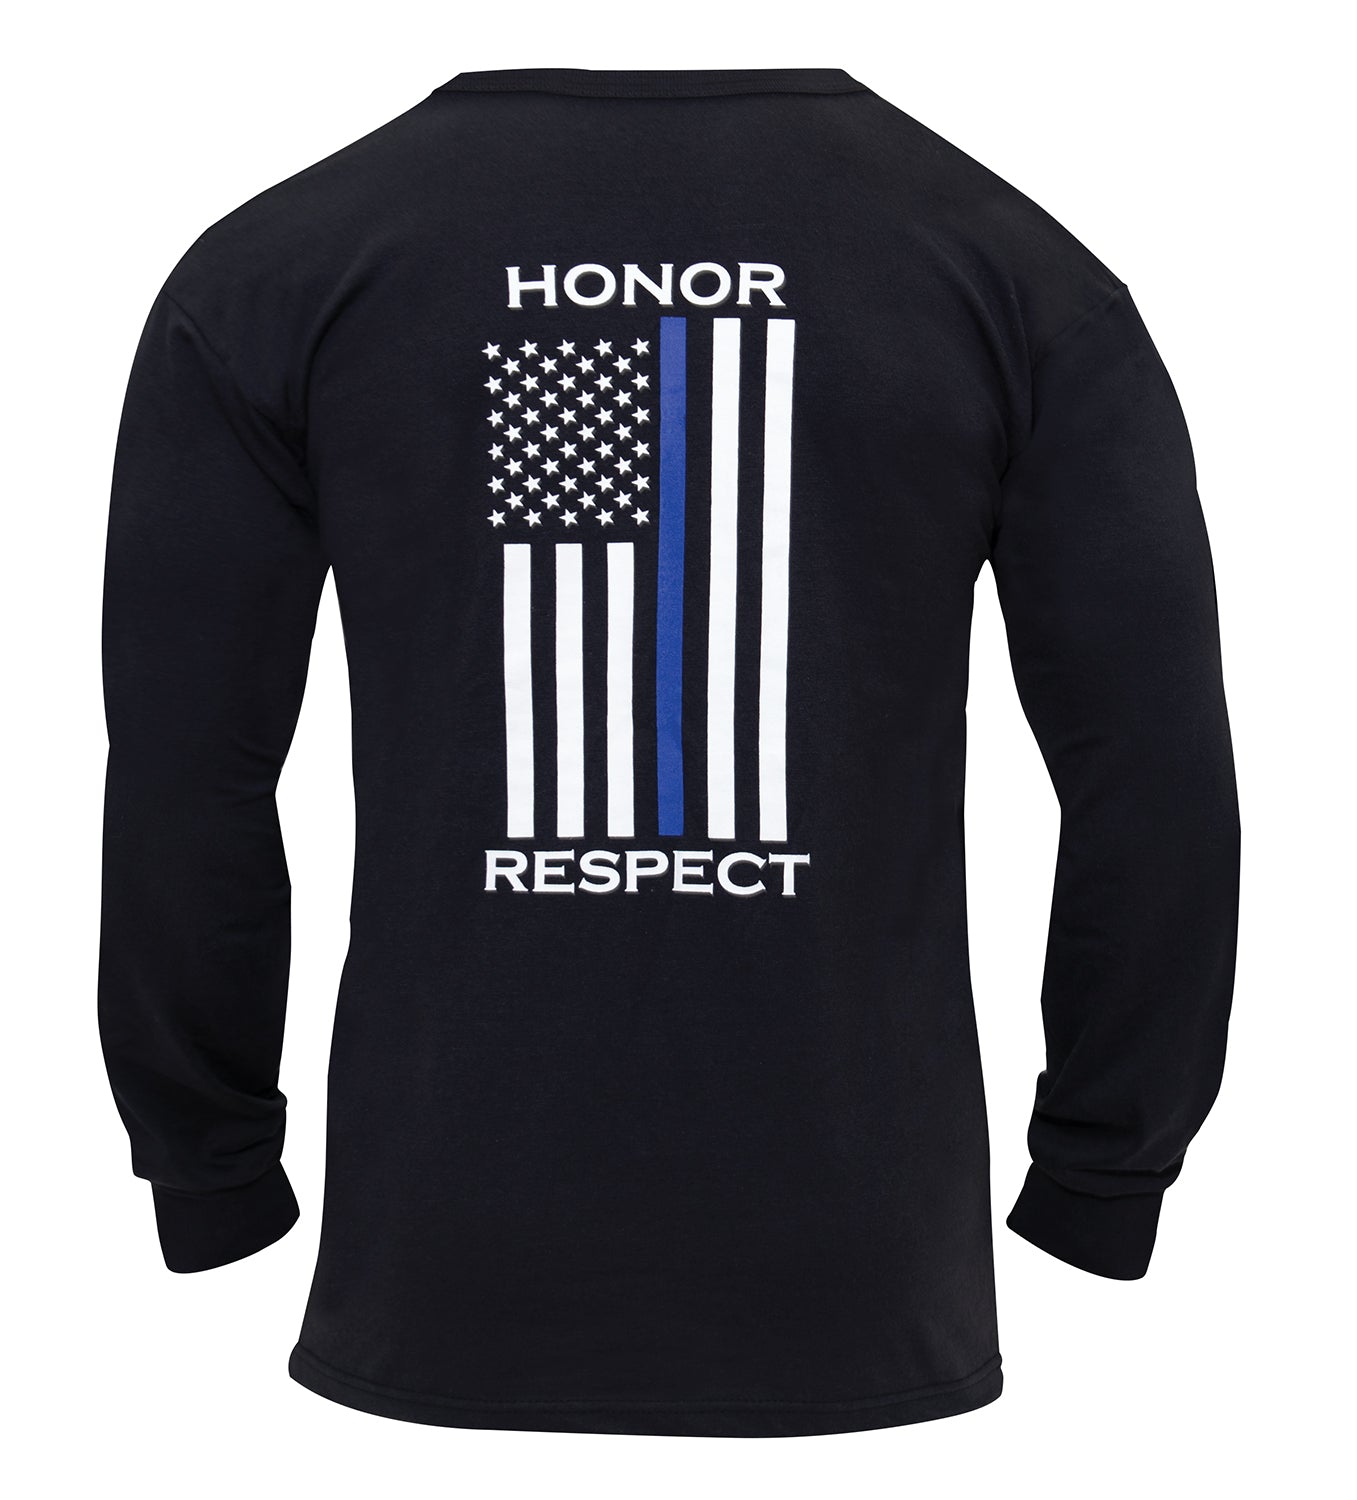 [Public Safety] Poly/Cotton Honor Respect Thin Blue Line Long Sleeve Shirts